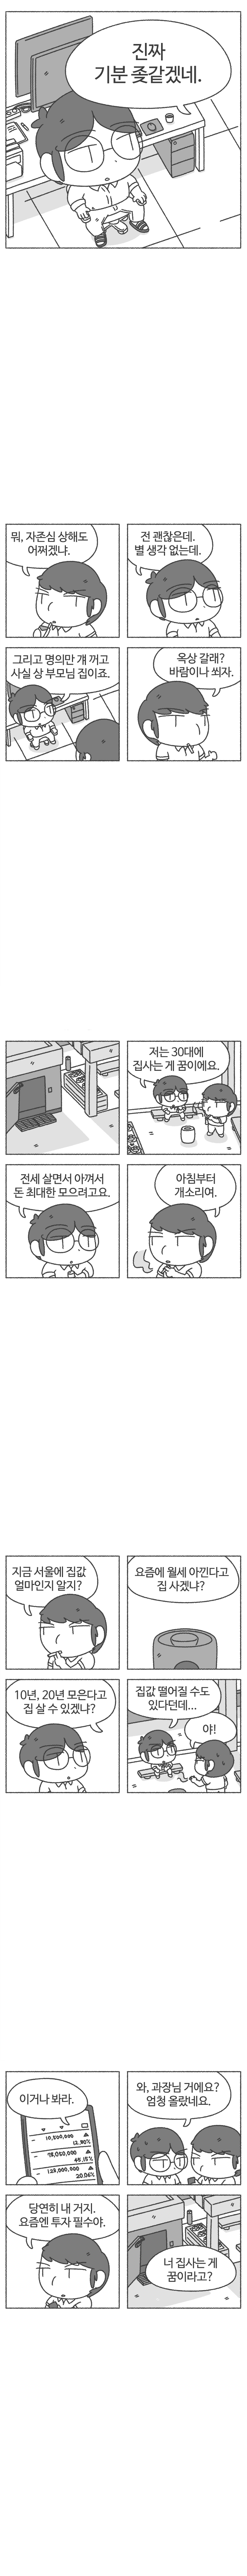 24post.co.kr_010.png